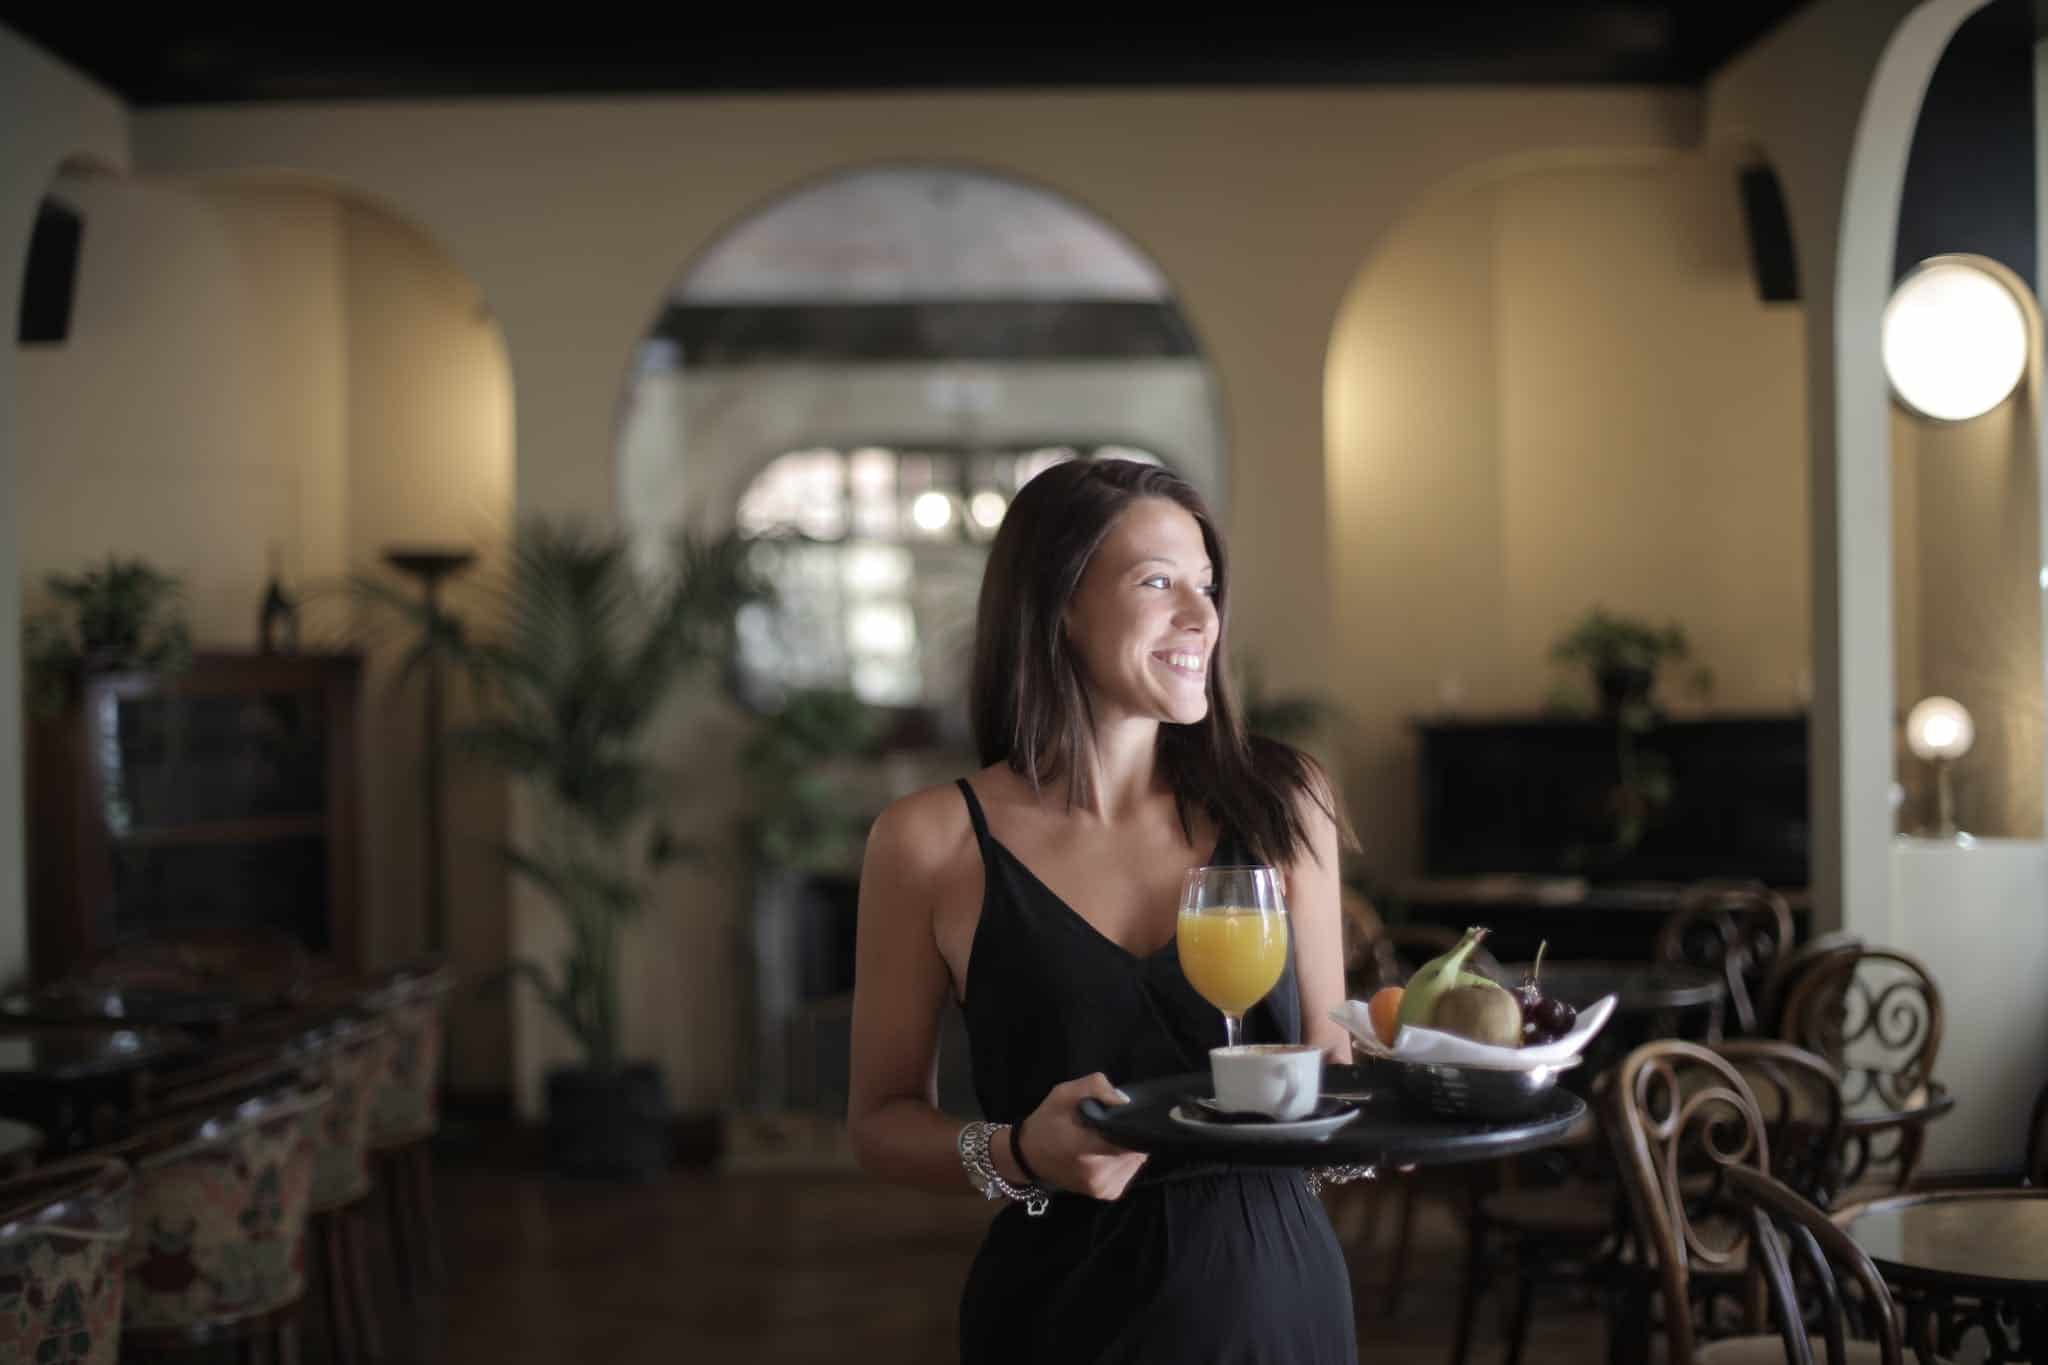 A smiling woman in a chic black dress carries a tray with a glass of orange juice and a cup of coffee in a well-appointed hotel dining area, embodying the attentive service often praised in positive hotel reviews as opposed to negative hotel reviews.